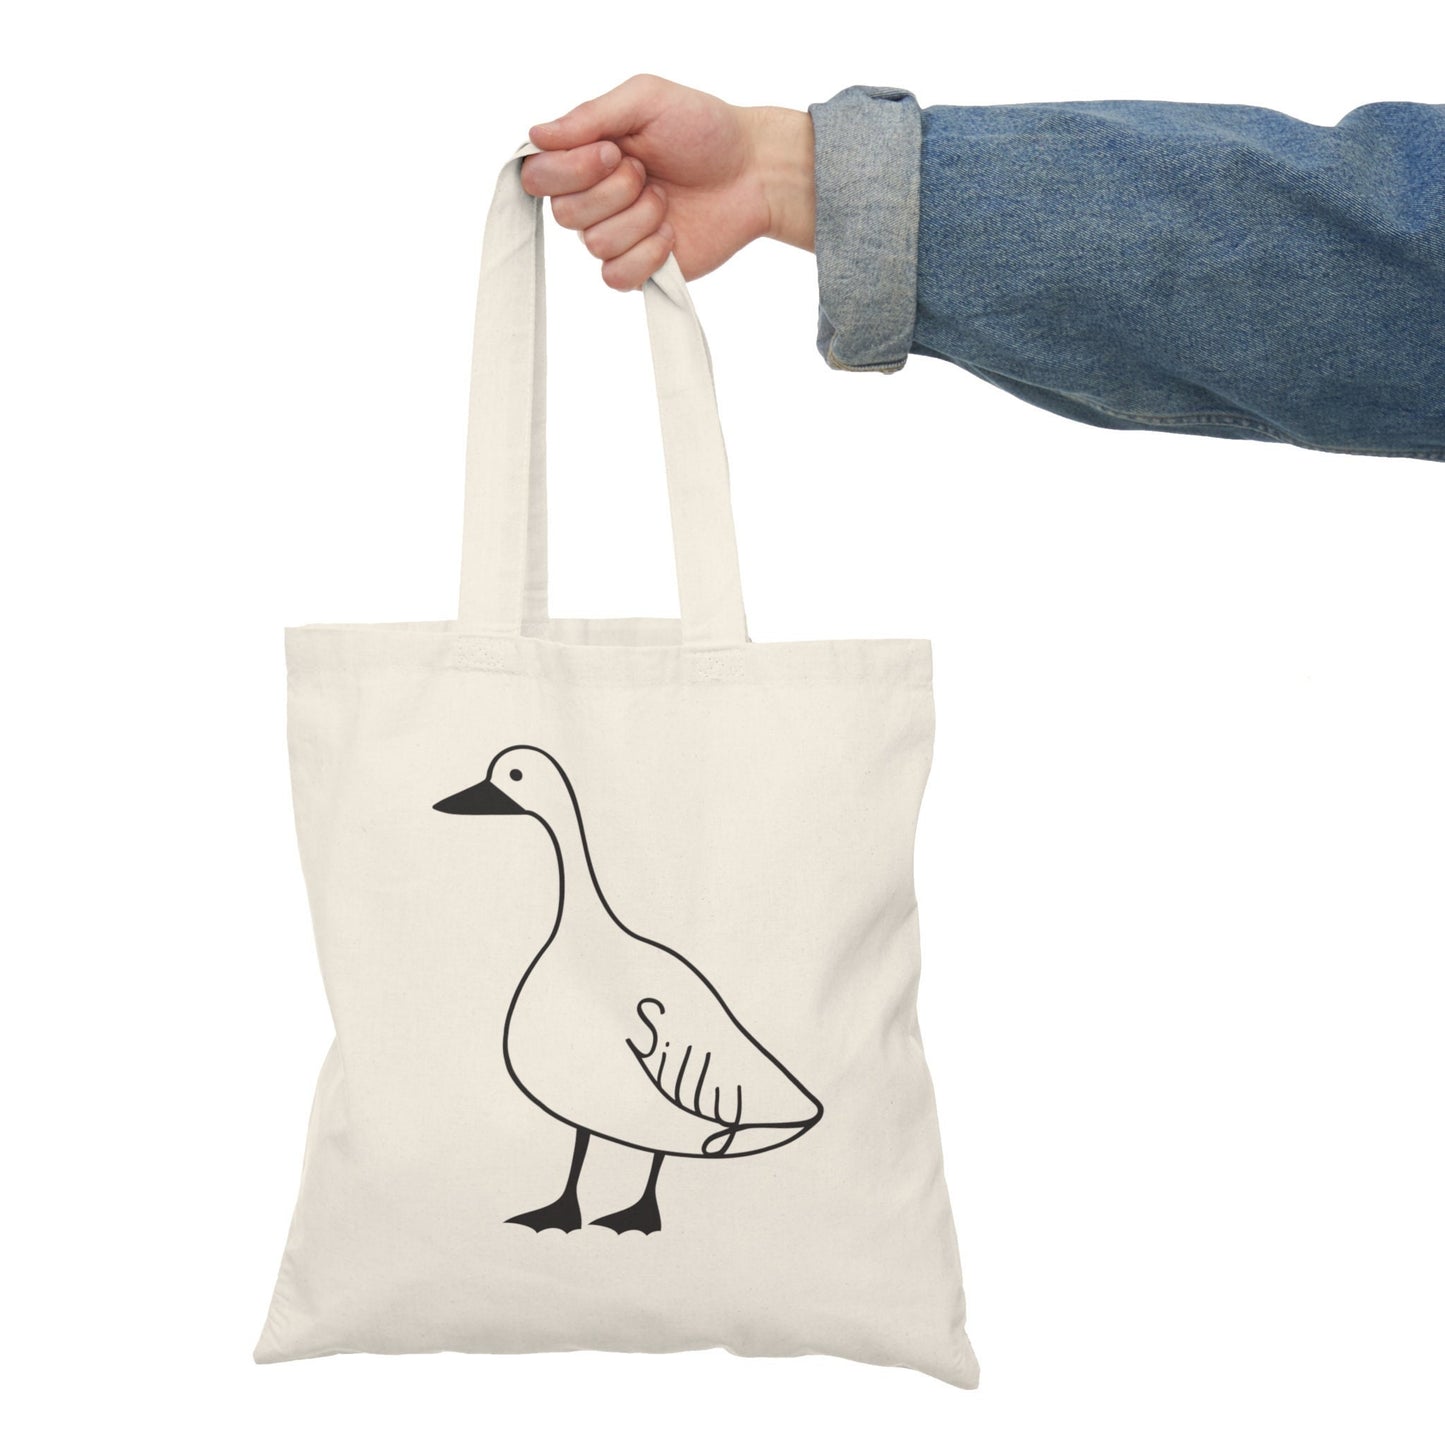 Silly Goose Tote Bag Funny Meme Farmers Market Bag Funny Gift Natural Tote Birthday Gift Tote Bag Gift for Her